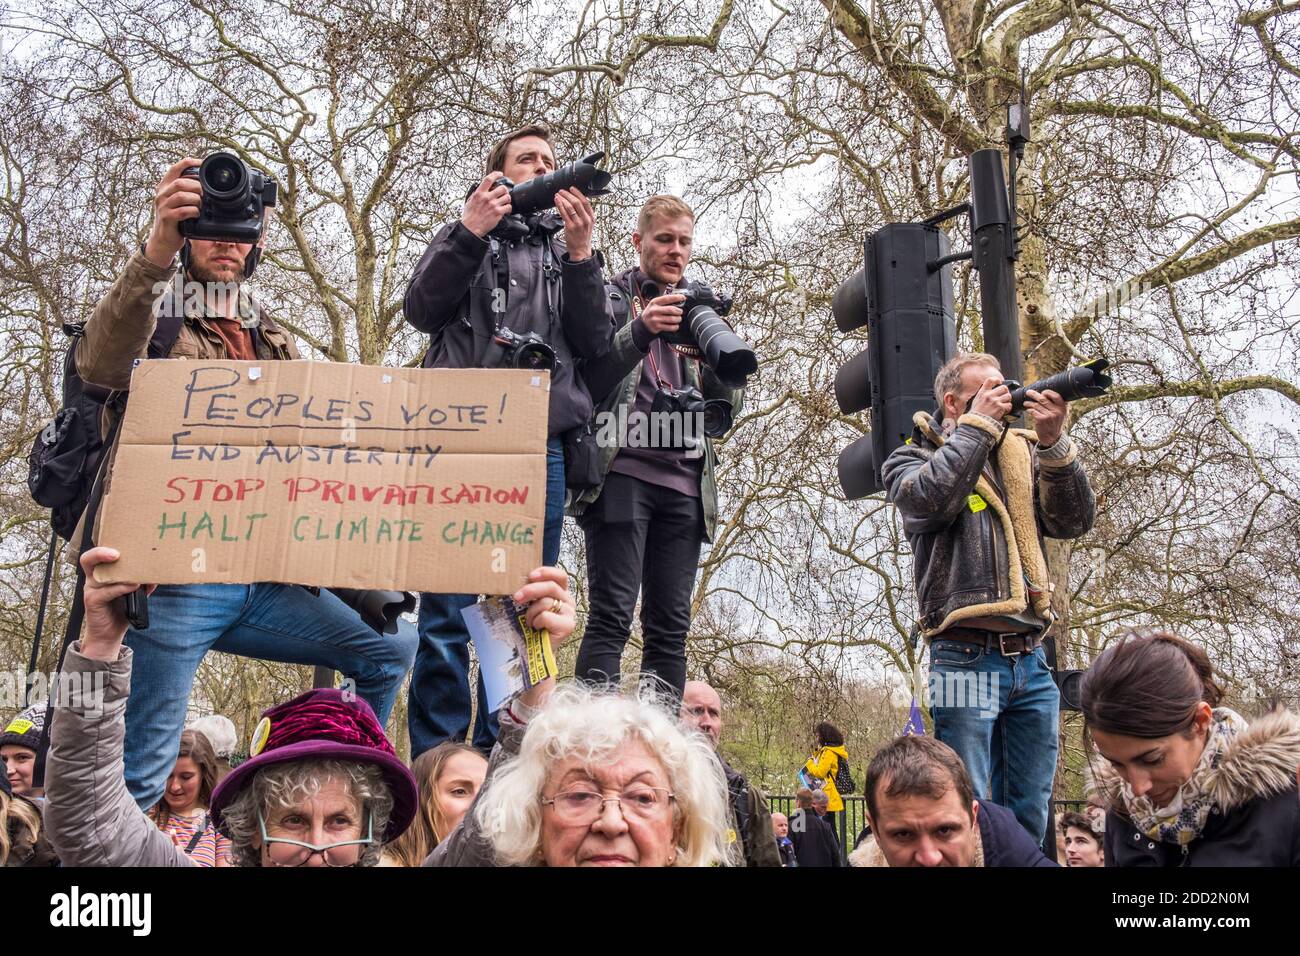 News photographers; protestors holding sign. People's Vote March, March 23rd 2019. London, England, GB, UK. Stock Photo